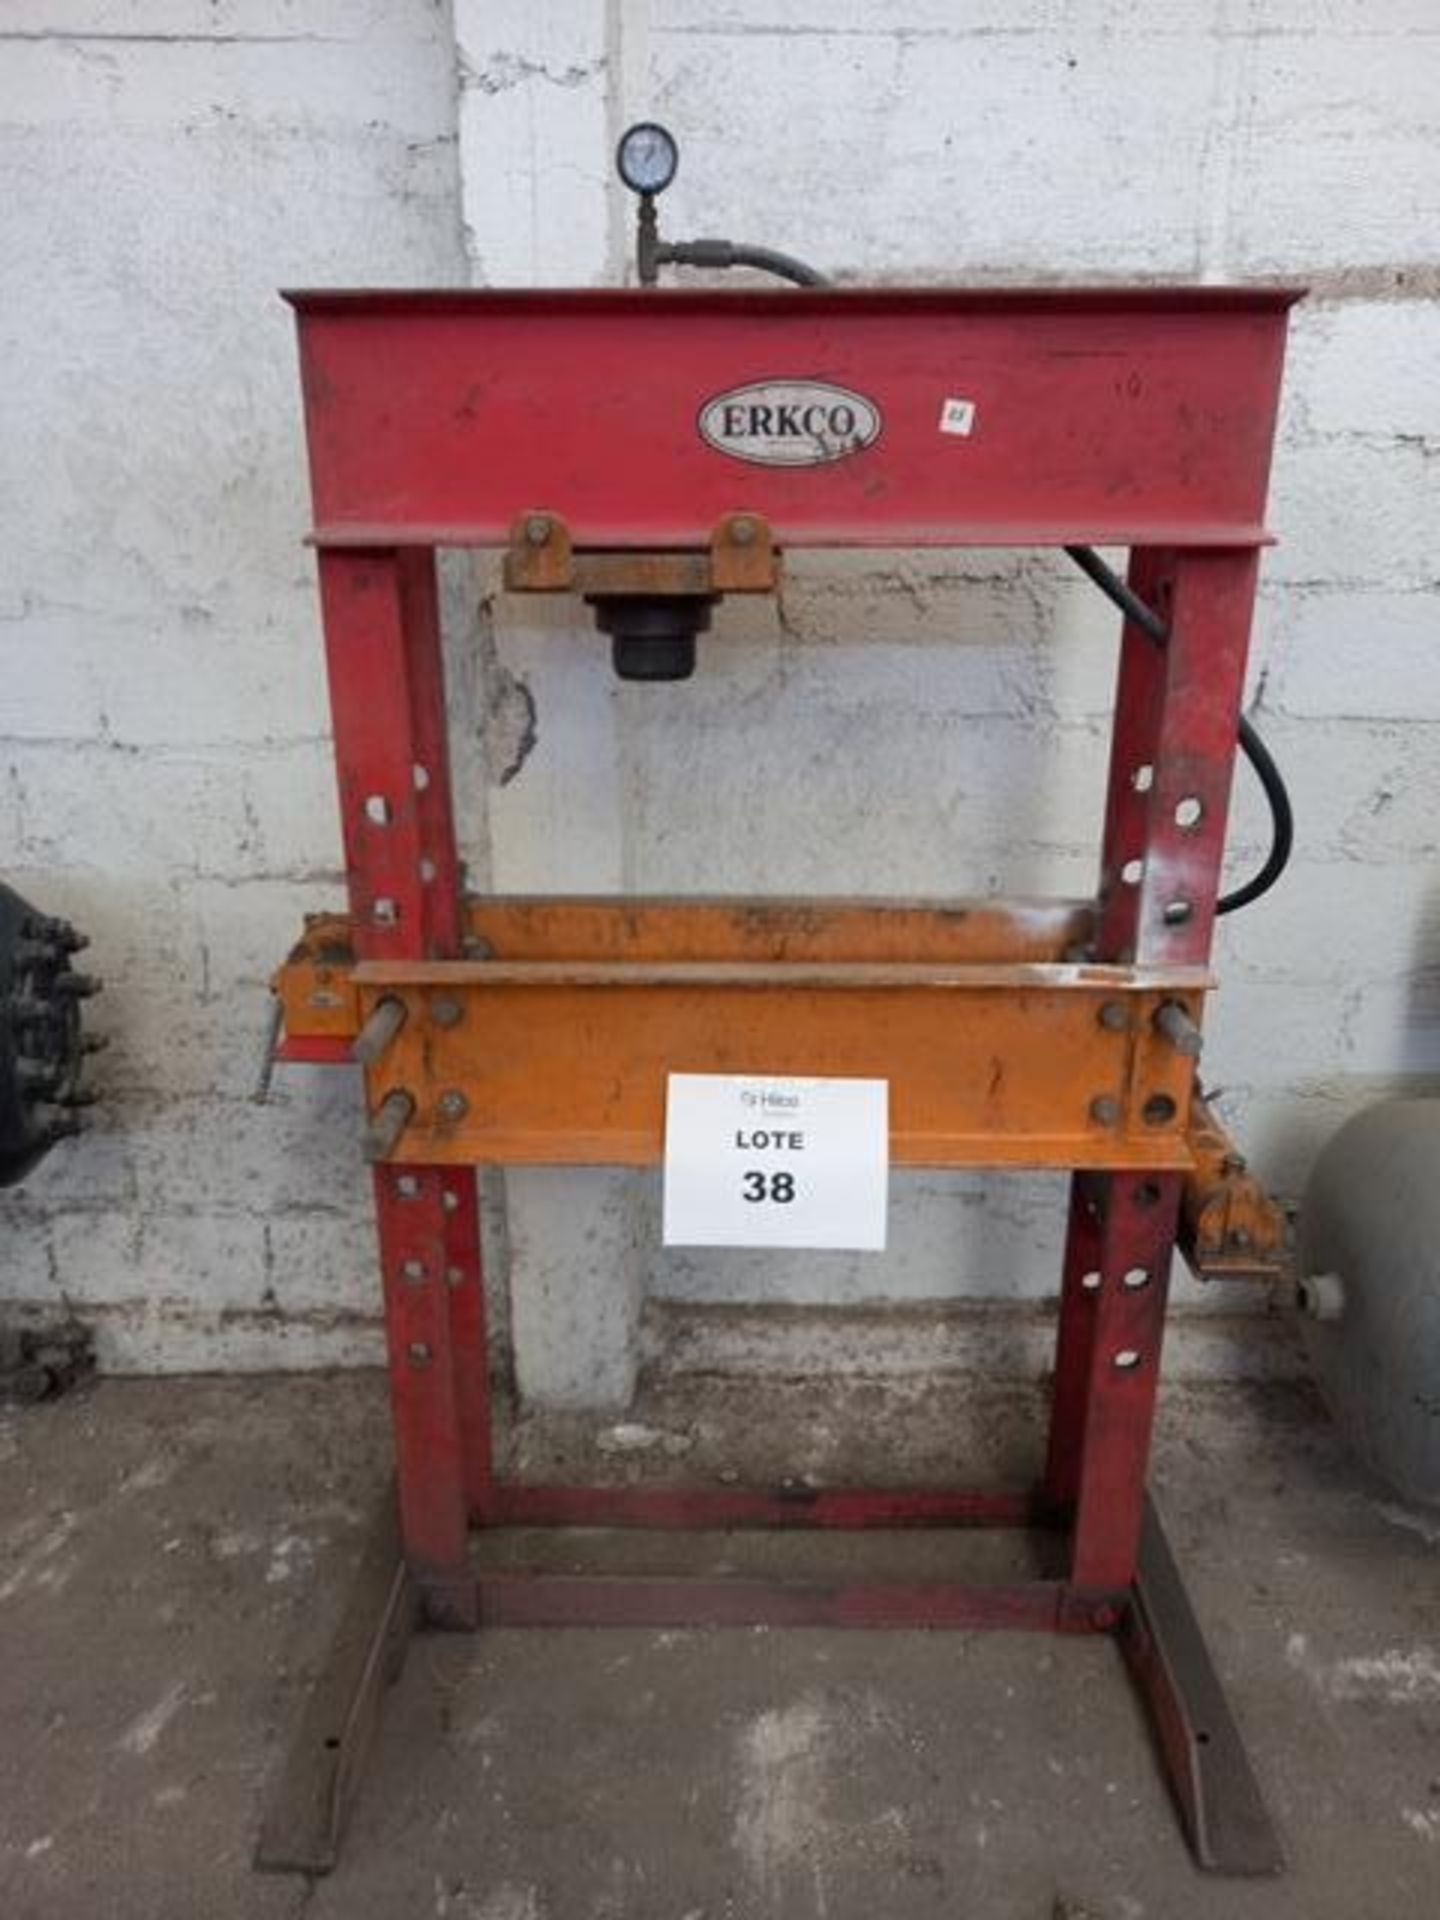 Erkco Press: Incomplete, Carbon Steel Frame only (Label: 38) (Location: Pachuca, Hidalgo) (REMOVAL